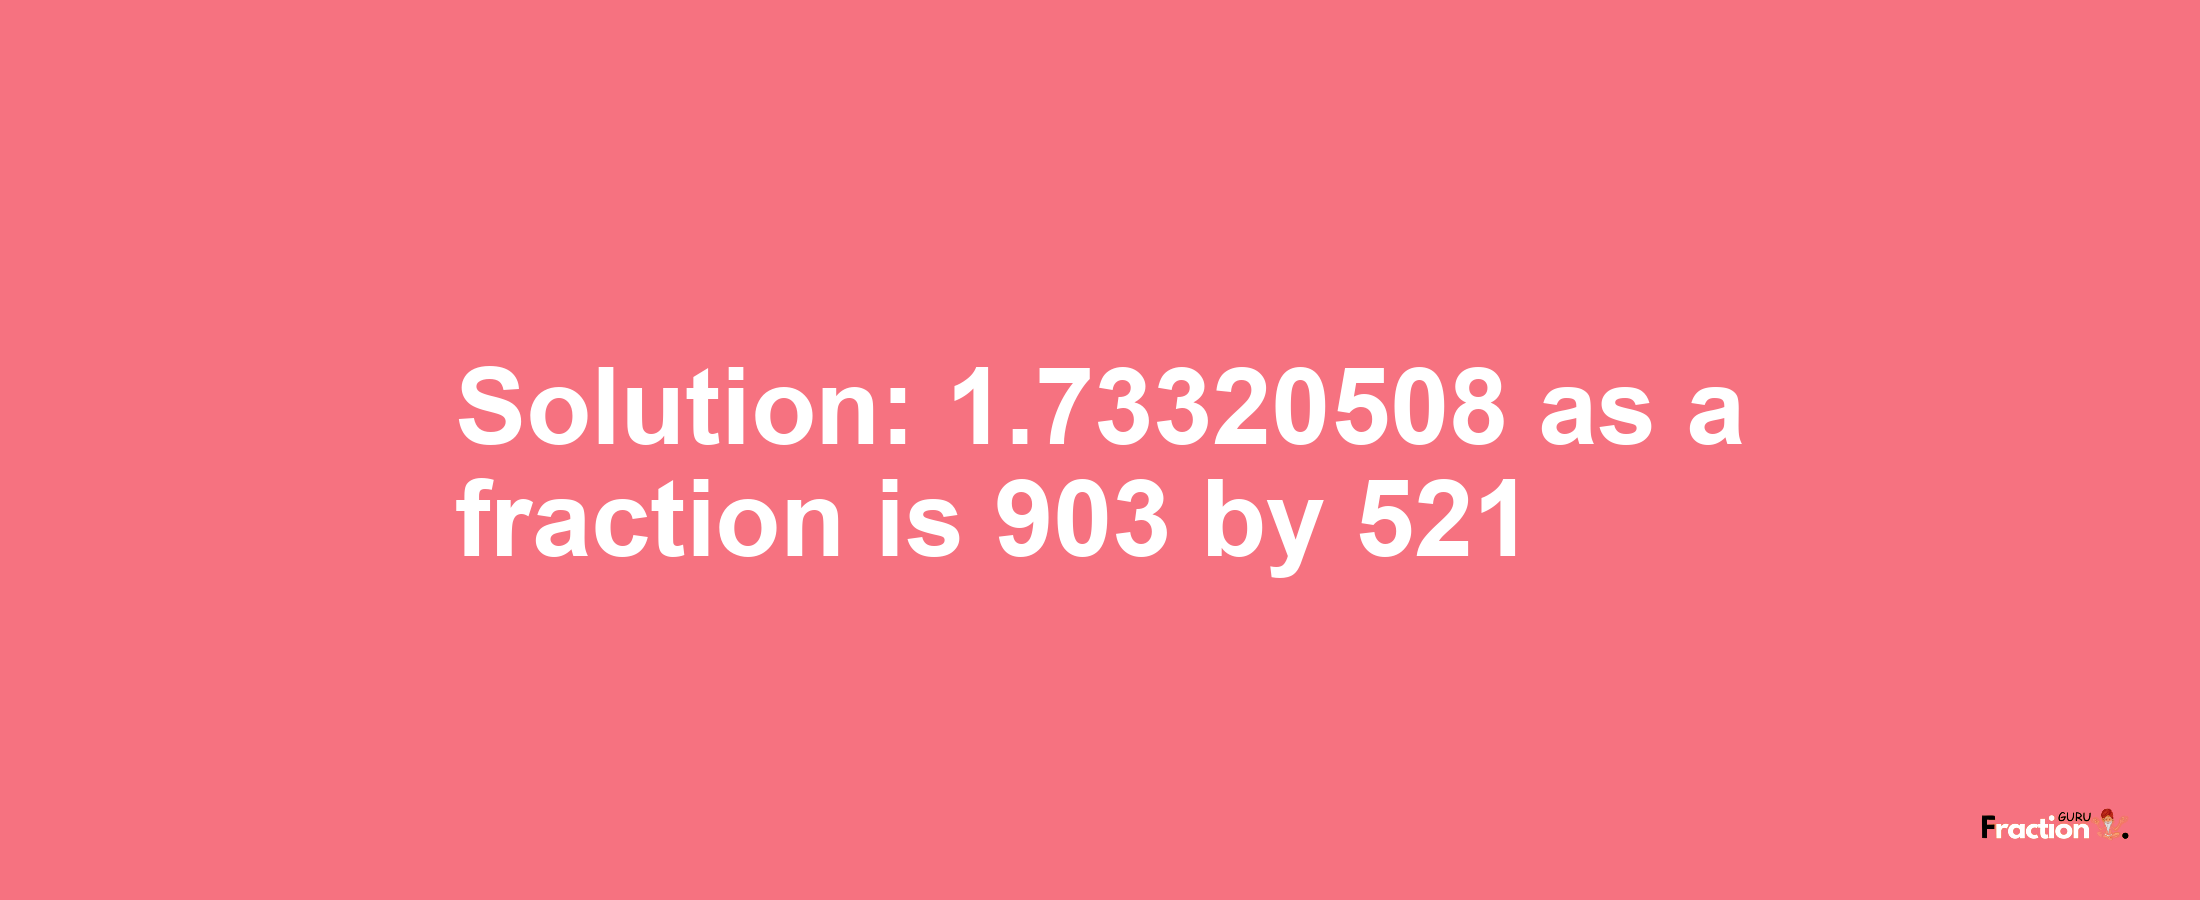 Solution:1.73320508 as a fraction is 903/521